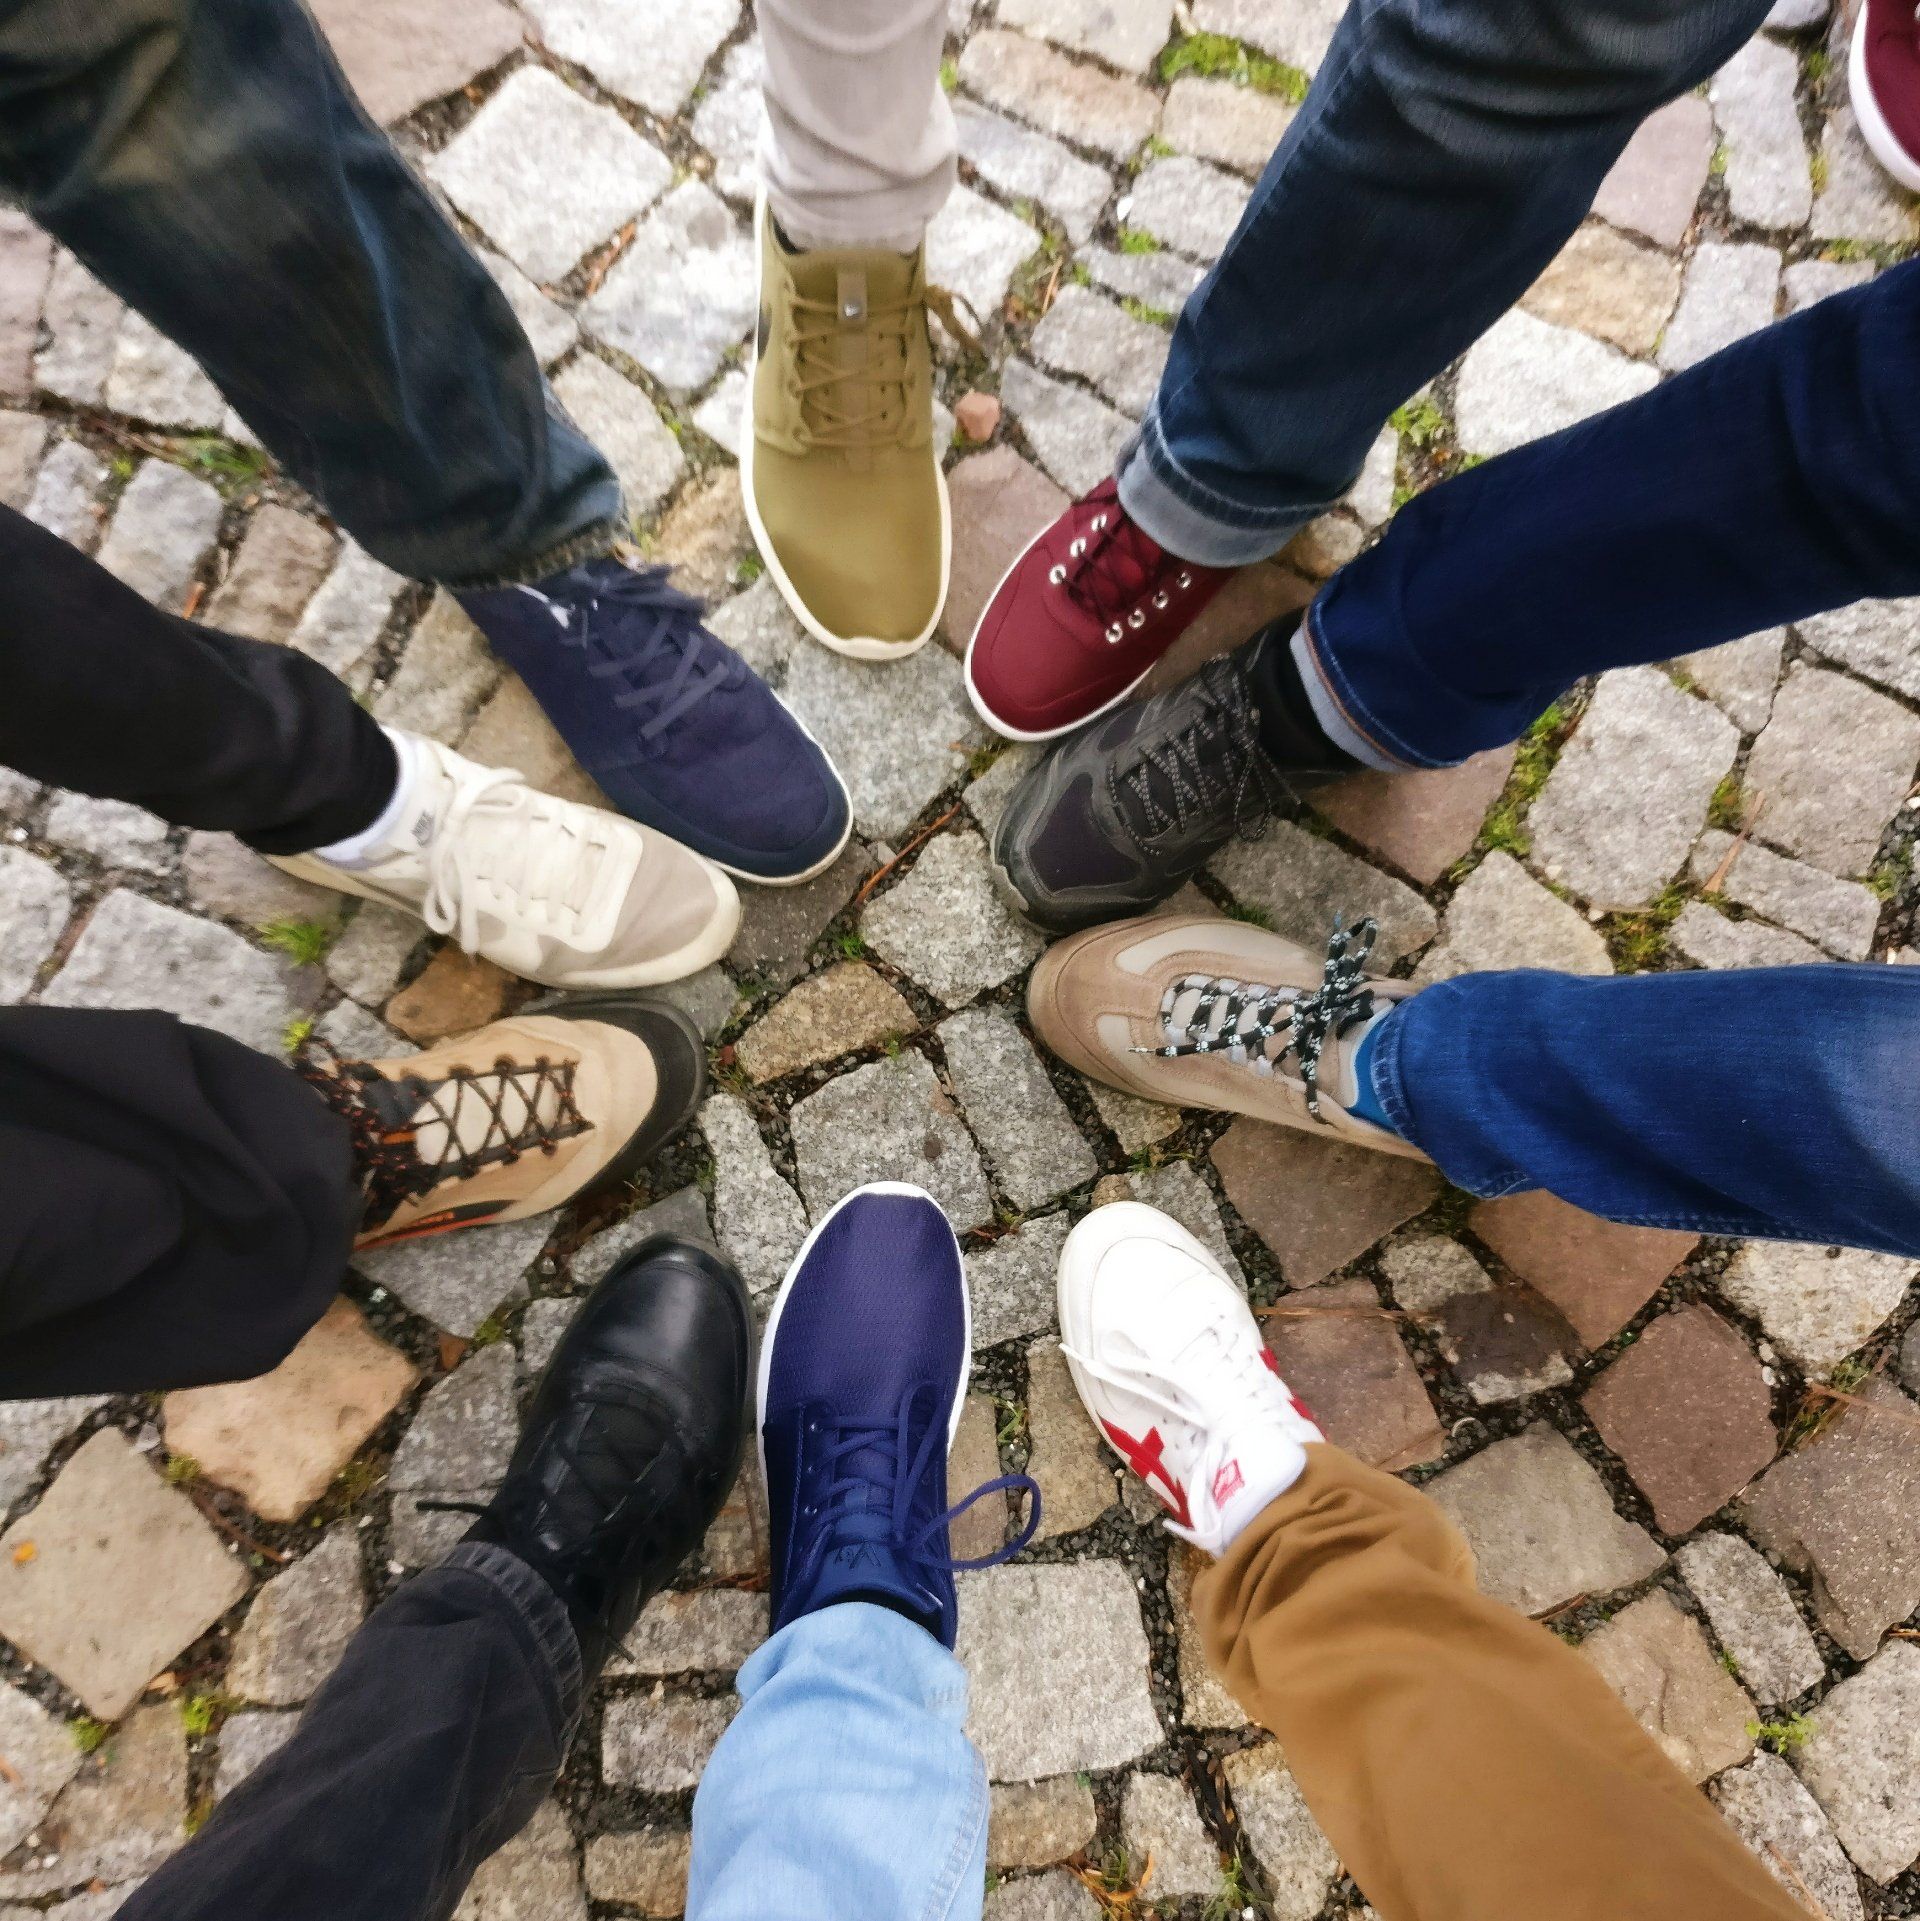 A group of people standing in a circle wearing different shoes